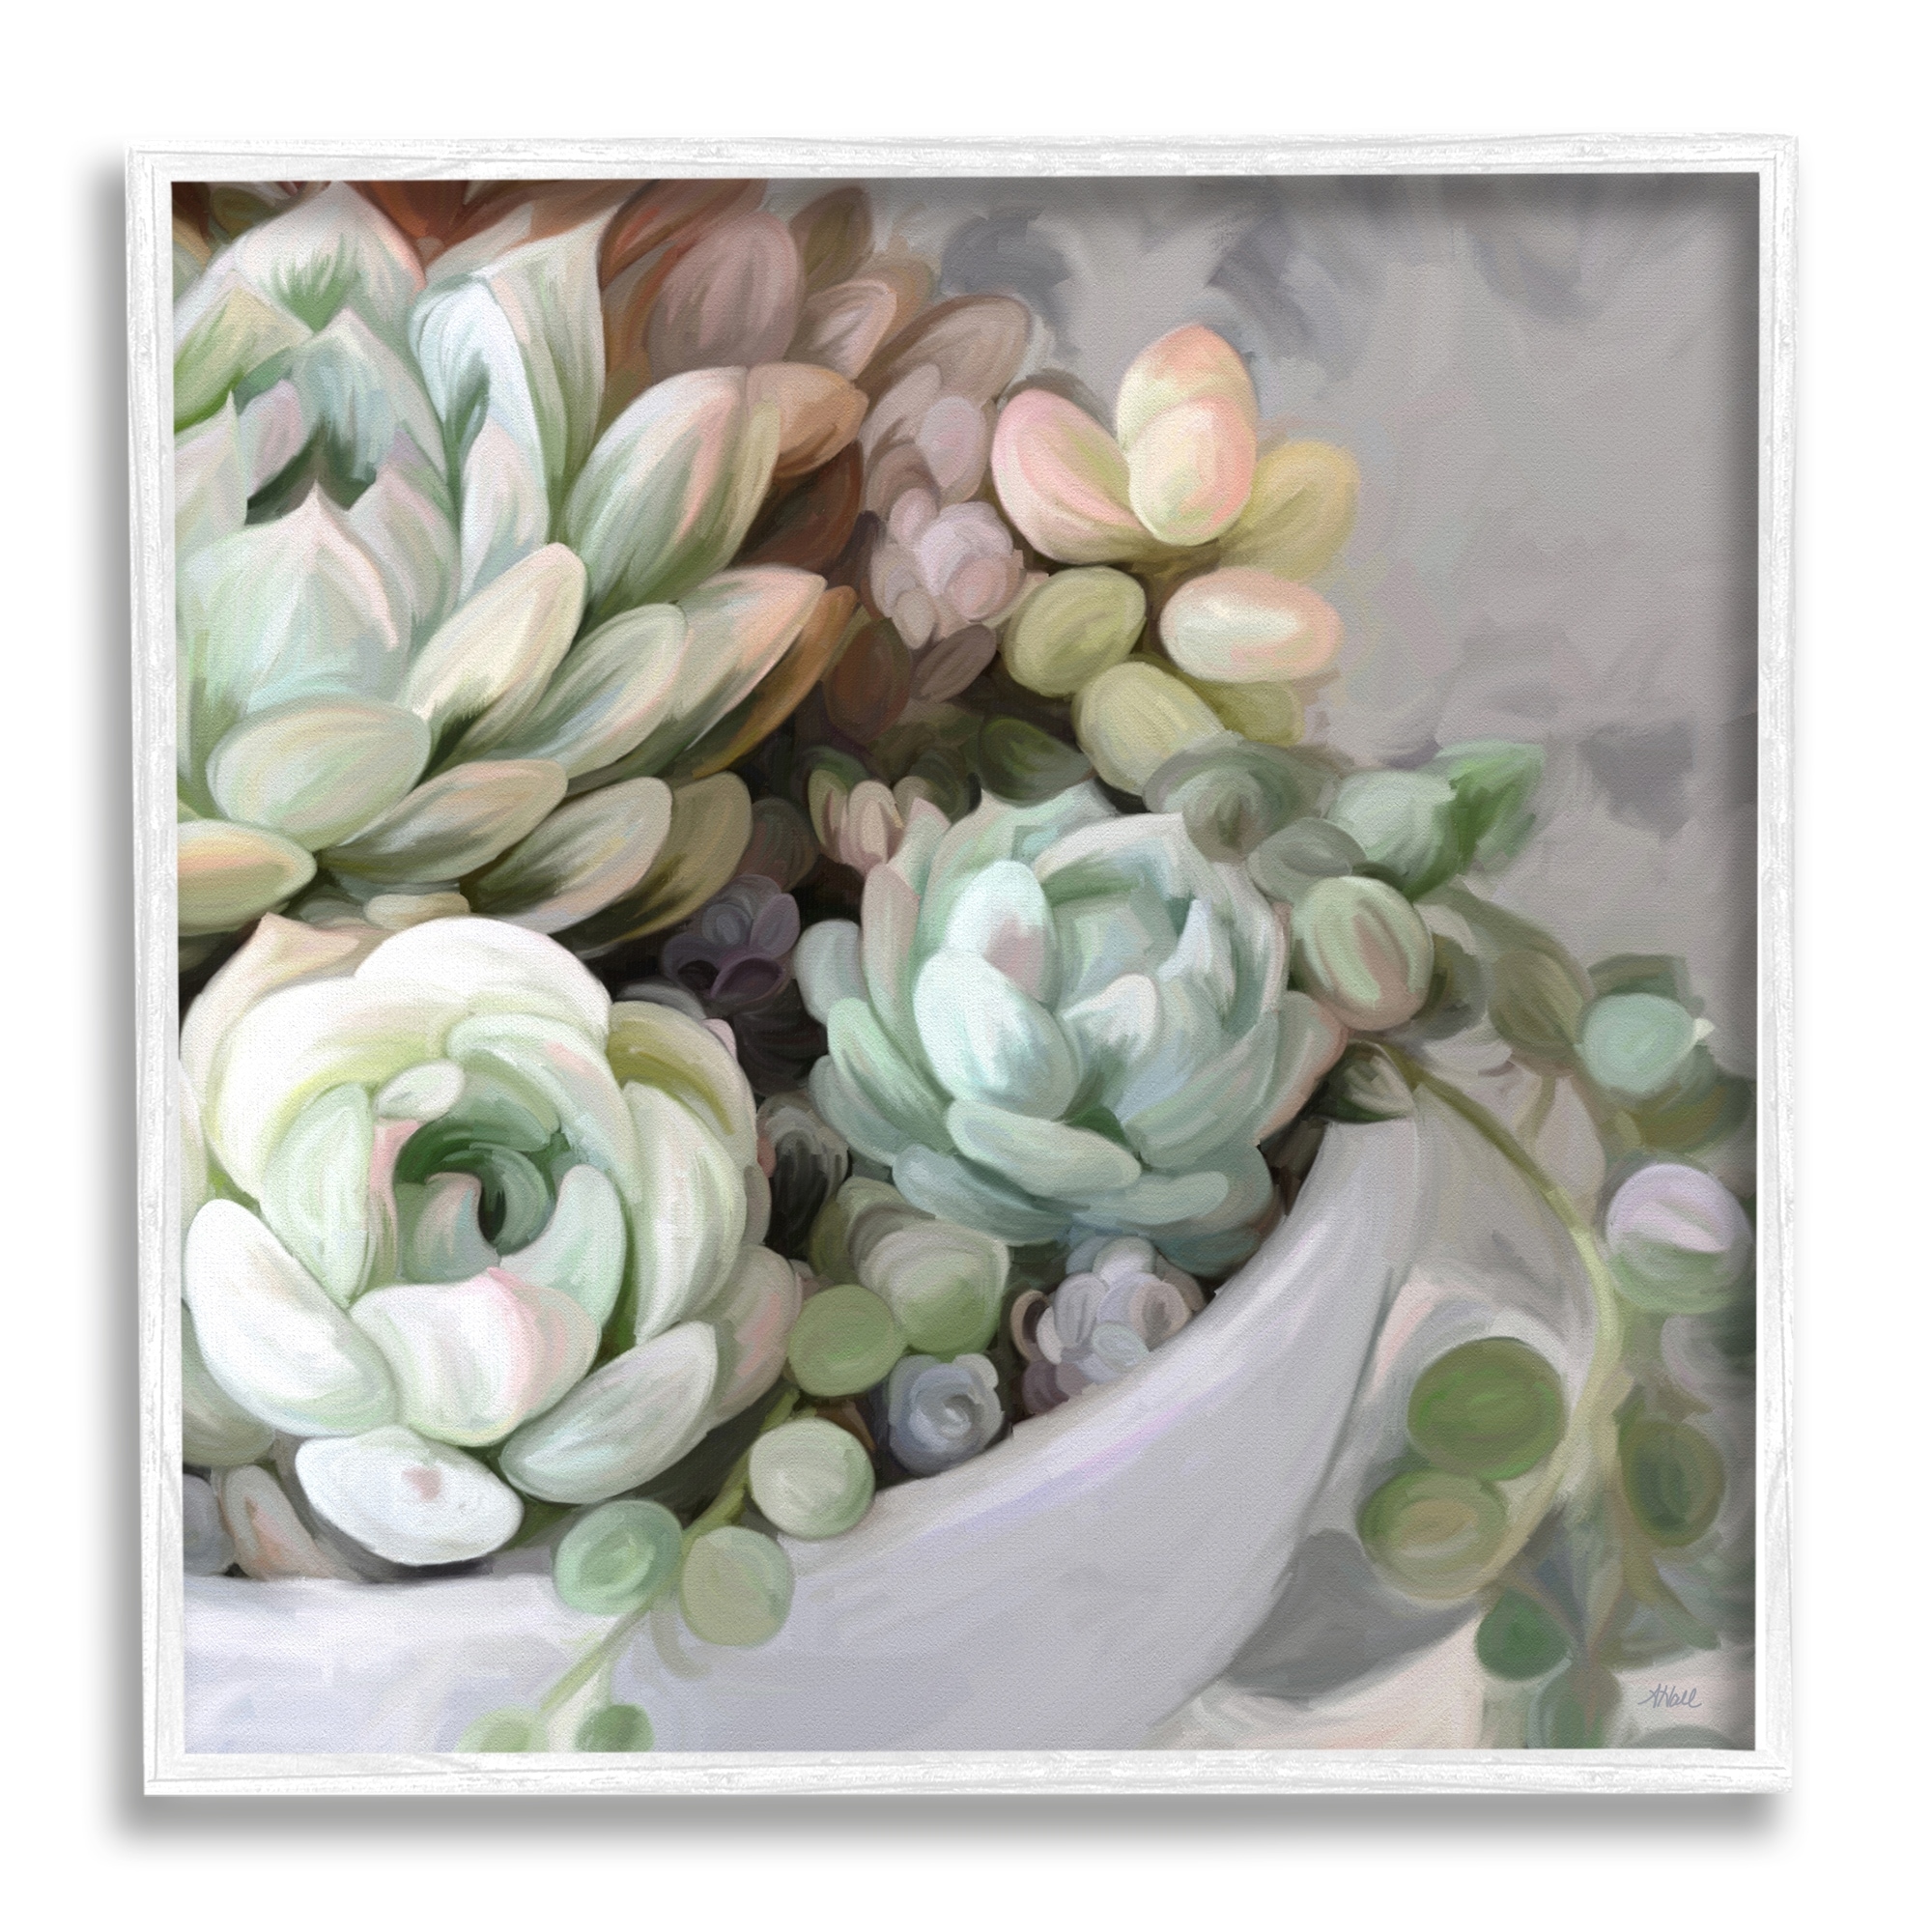 Stupell Botanical Succulent Arrangement Potted Floral Blossoms Framed Wall  Art, Design by Amy Hall Multi Bed Bath  Beyond 36348186